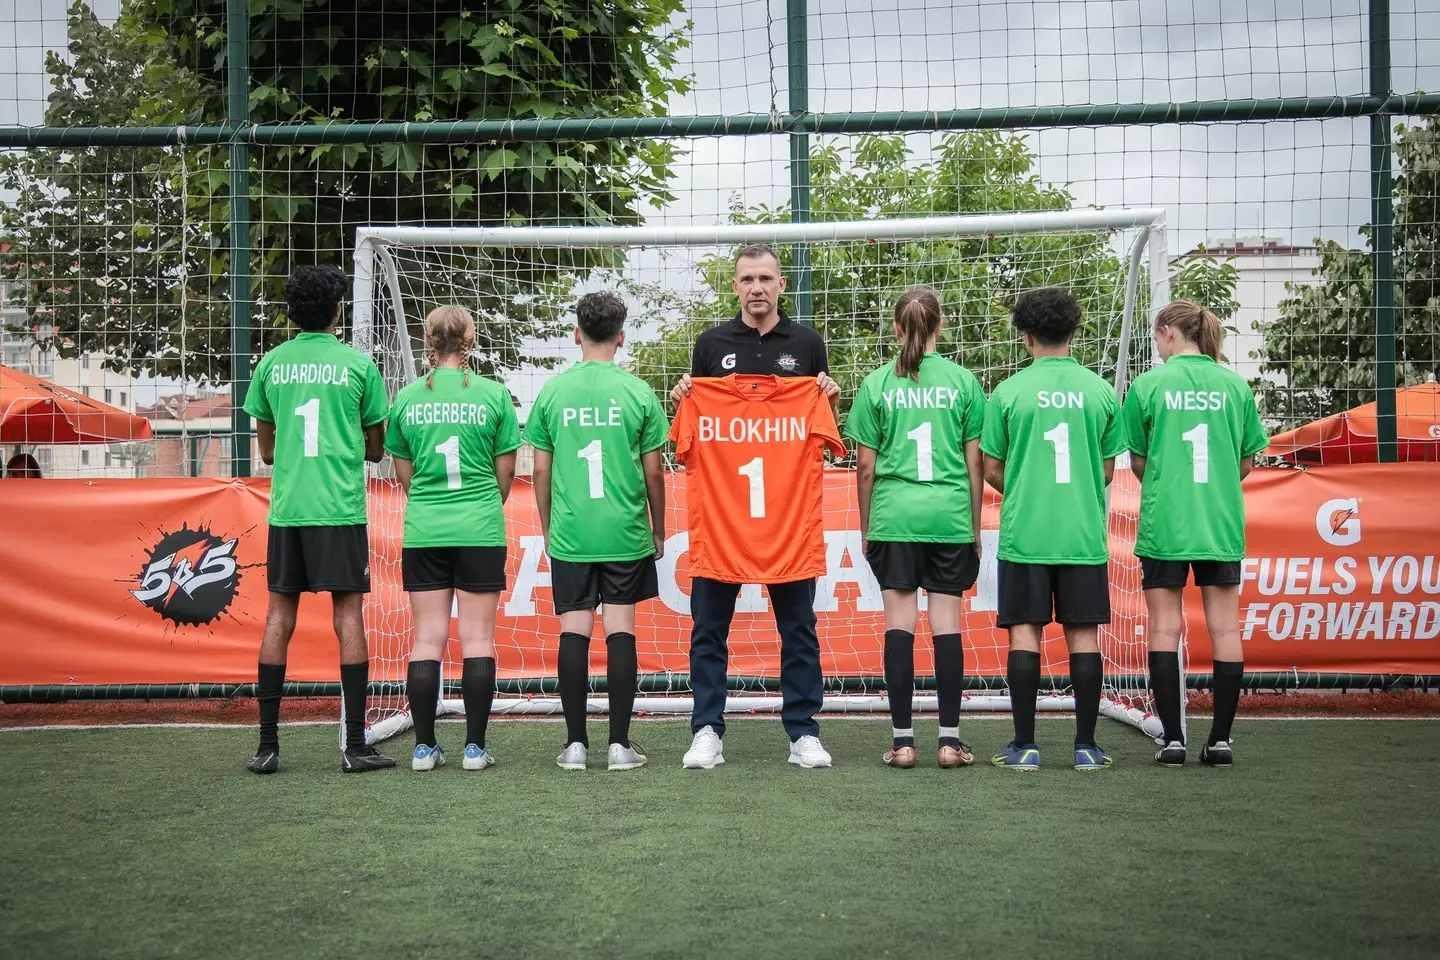 New global data reveals that over four in 10 parents believe that a lack of visible and relatable role models is a barrier to teens taking up and staying in sport. Here, Ukrainian football legend Andriy Shevchenko (centre) and six players at the Gatorade 5v5 global final in Istanbul (Türkiye) pay homage to the role models in their lives. Shevchenko cited legendary former Ukrainian footballer and manager, Oleg Blokhin, as his role model as he was one of the early legends who put Ukrainian football on the map and forged a path for future players.. (Image credit: Gatorade)